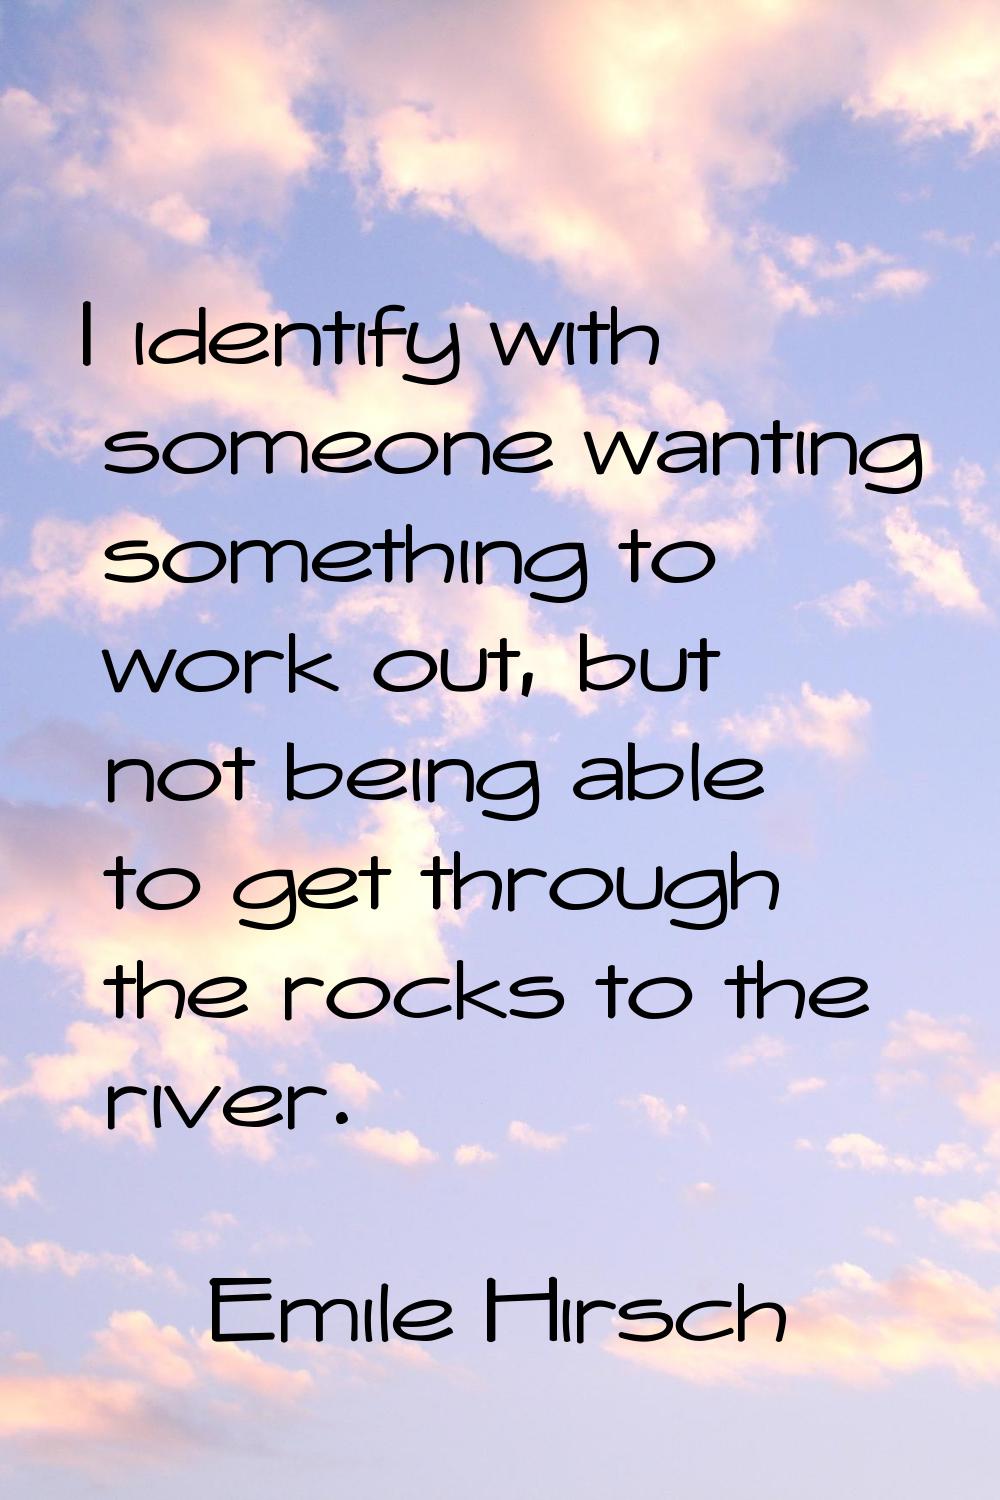 I identify with someone wanting something to work out, but not being able to get through the rocks 